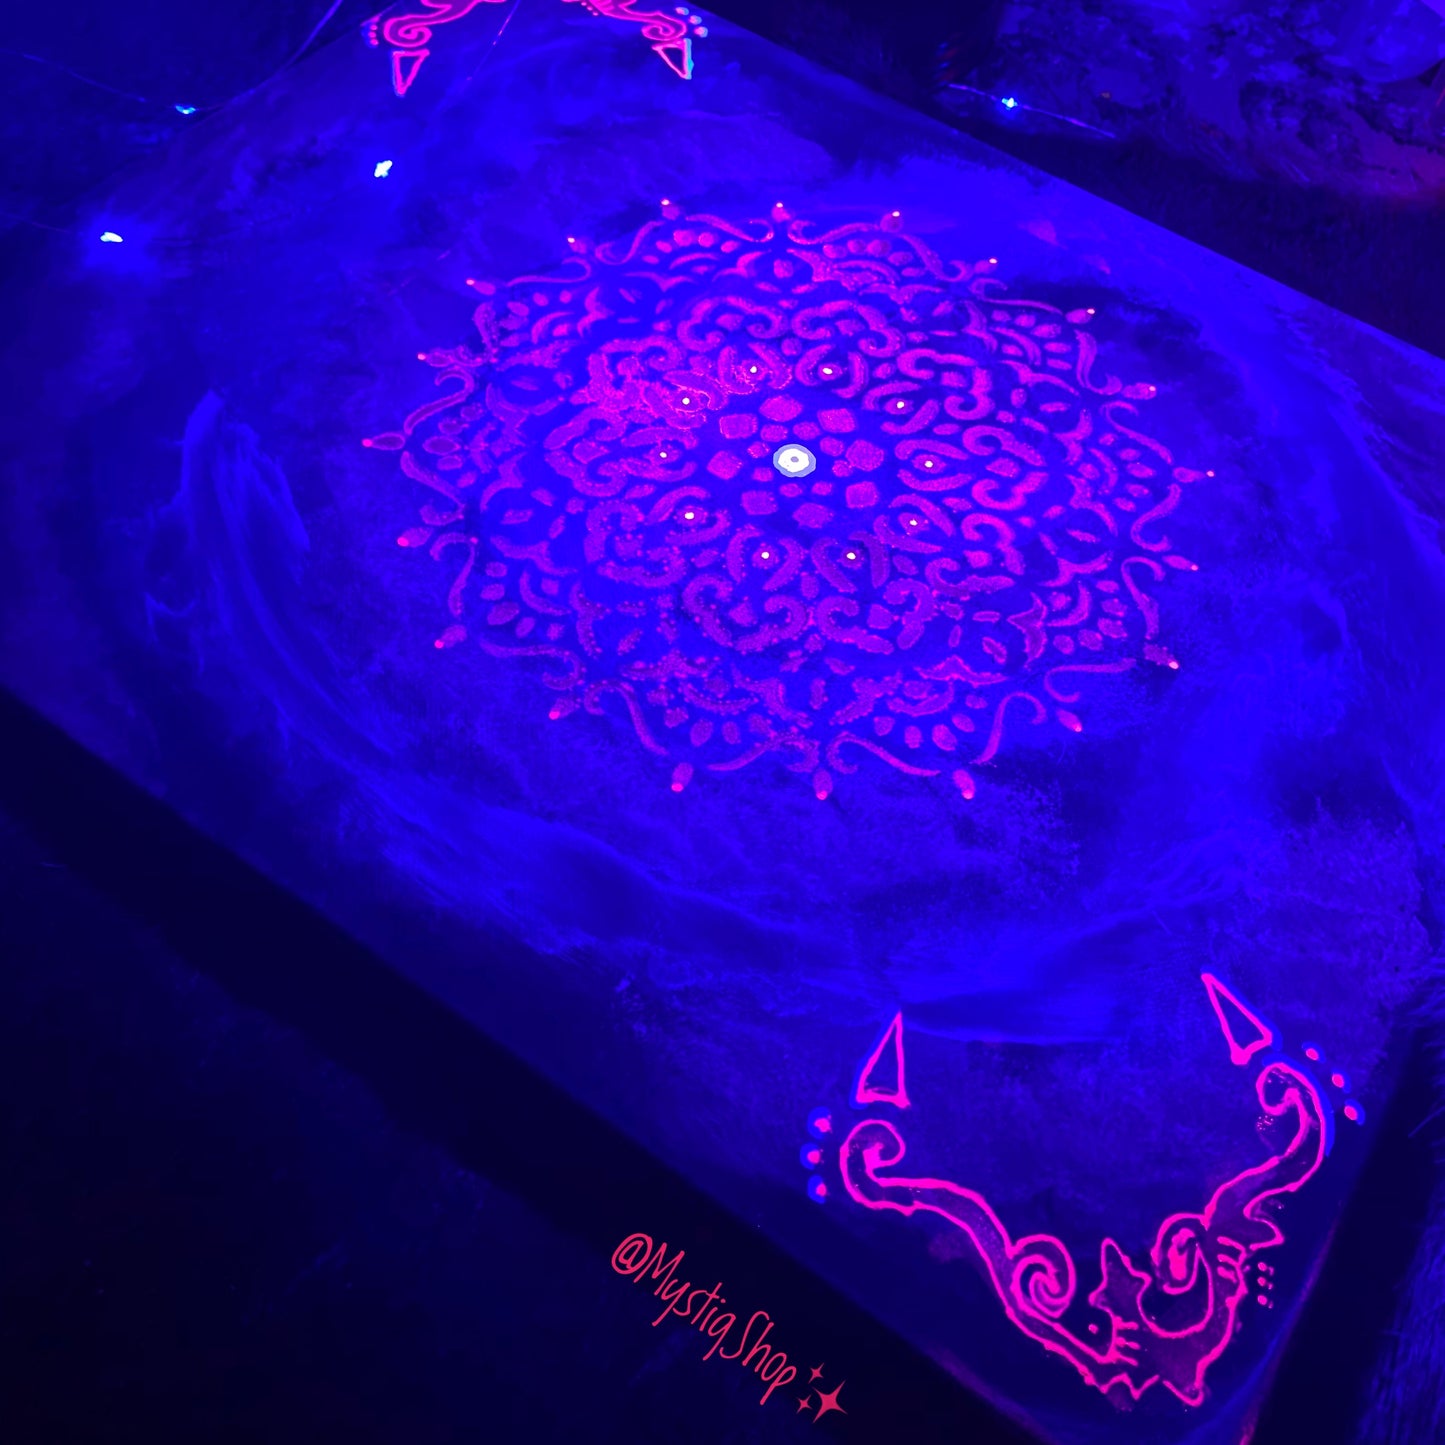 UV Painting: “Knowing in UV”